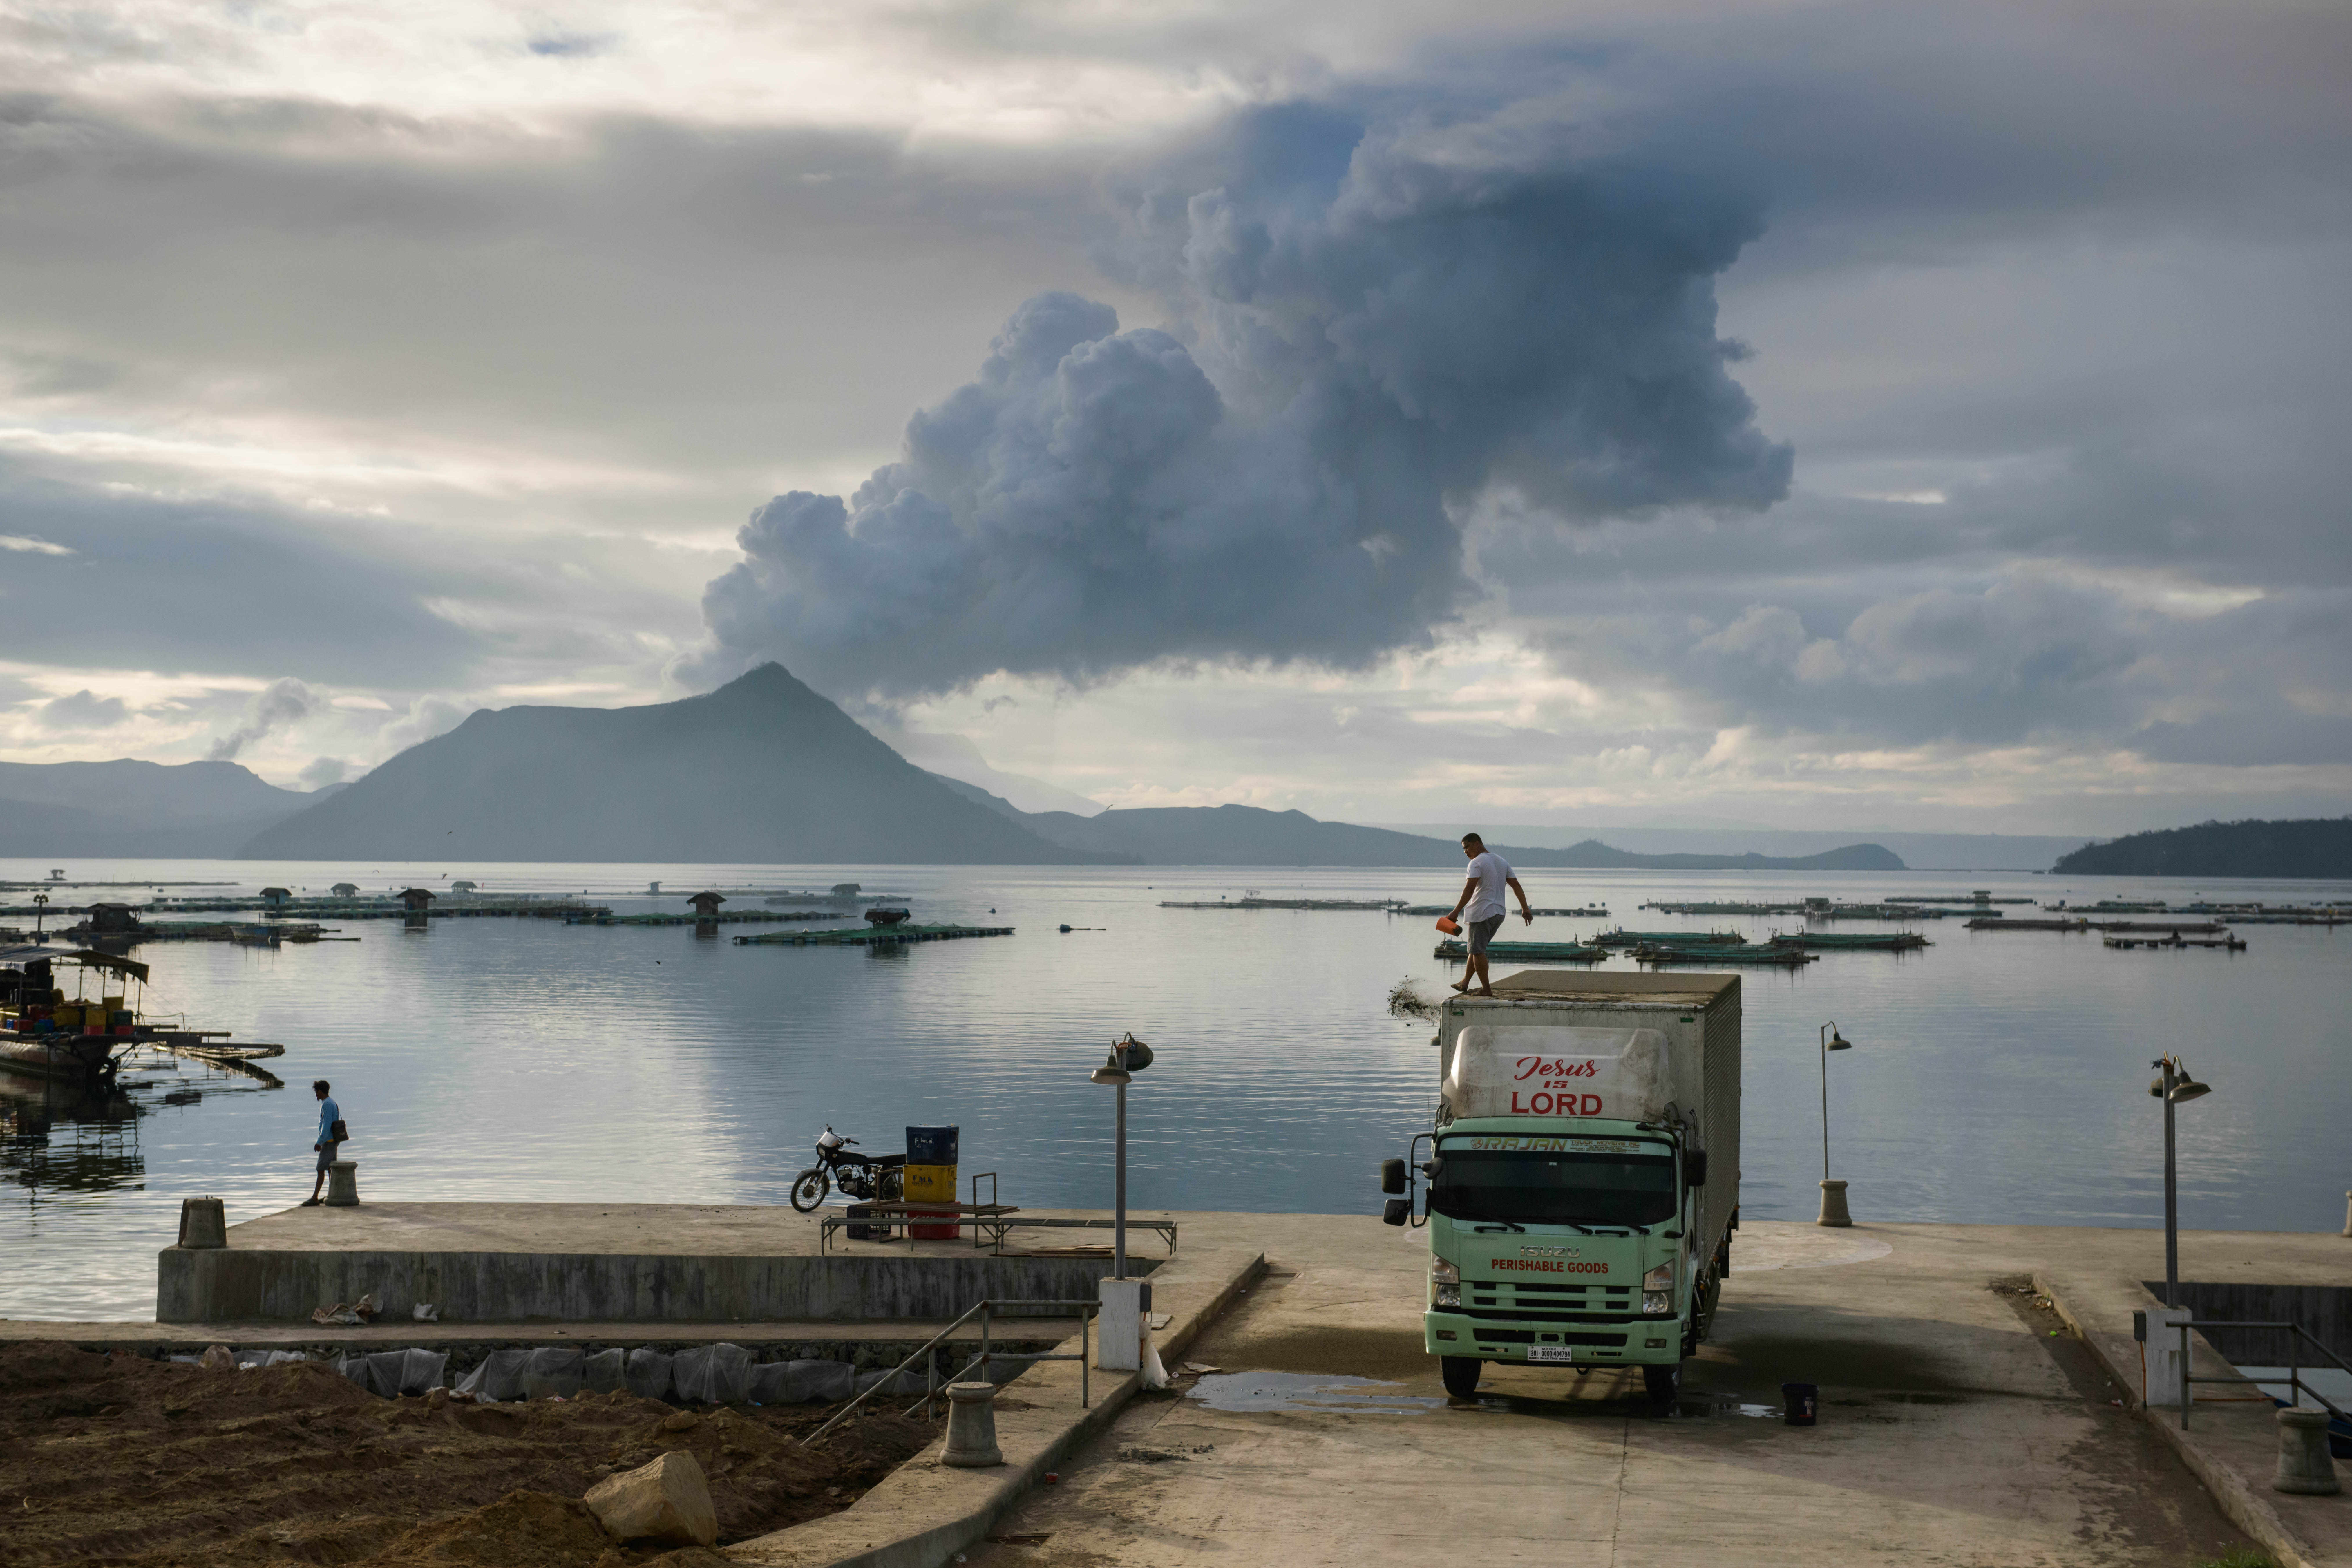 A plume of steam shoots up from Philippines’ Taal Volcano, which saw a devastating eruption on 12 January 2020